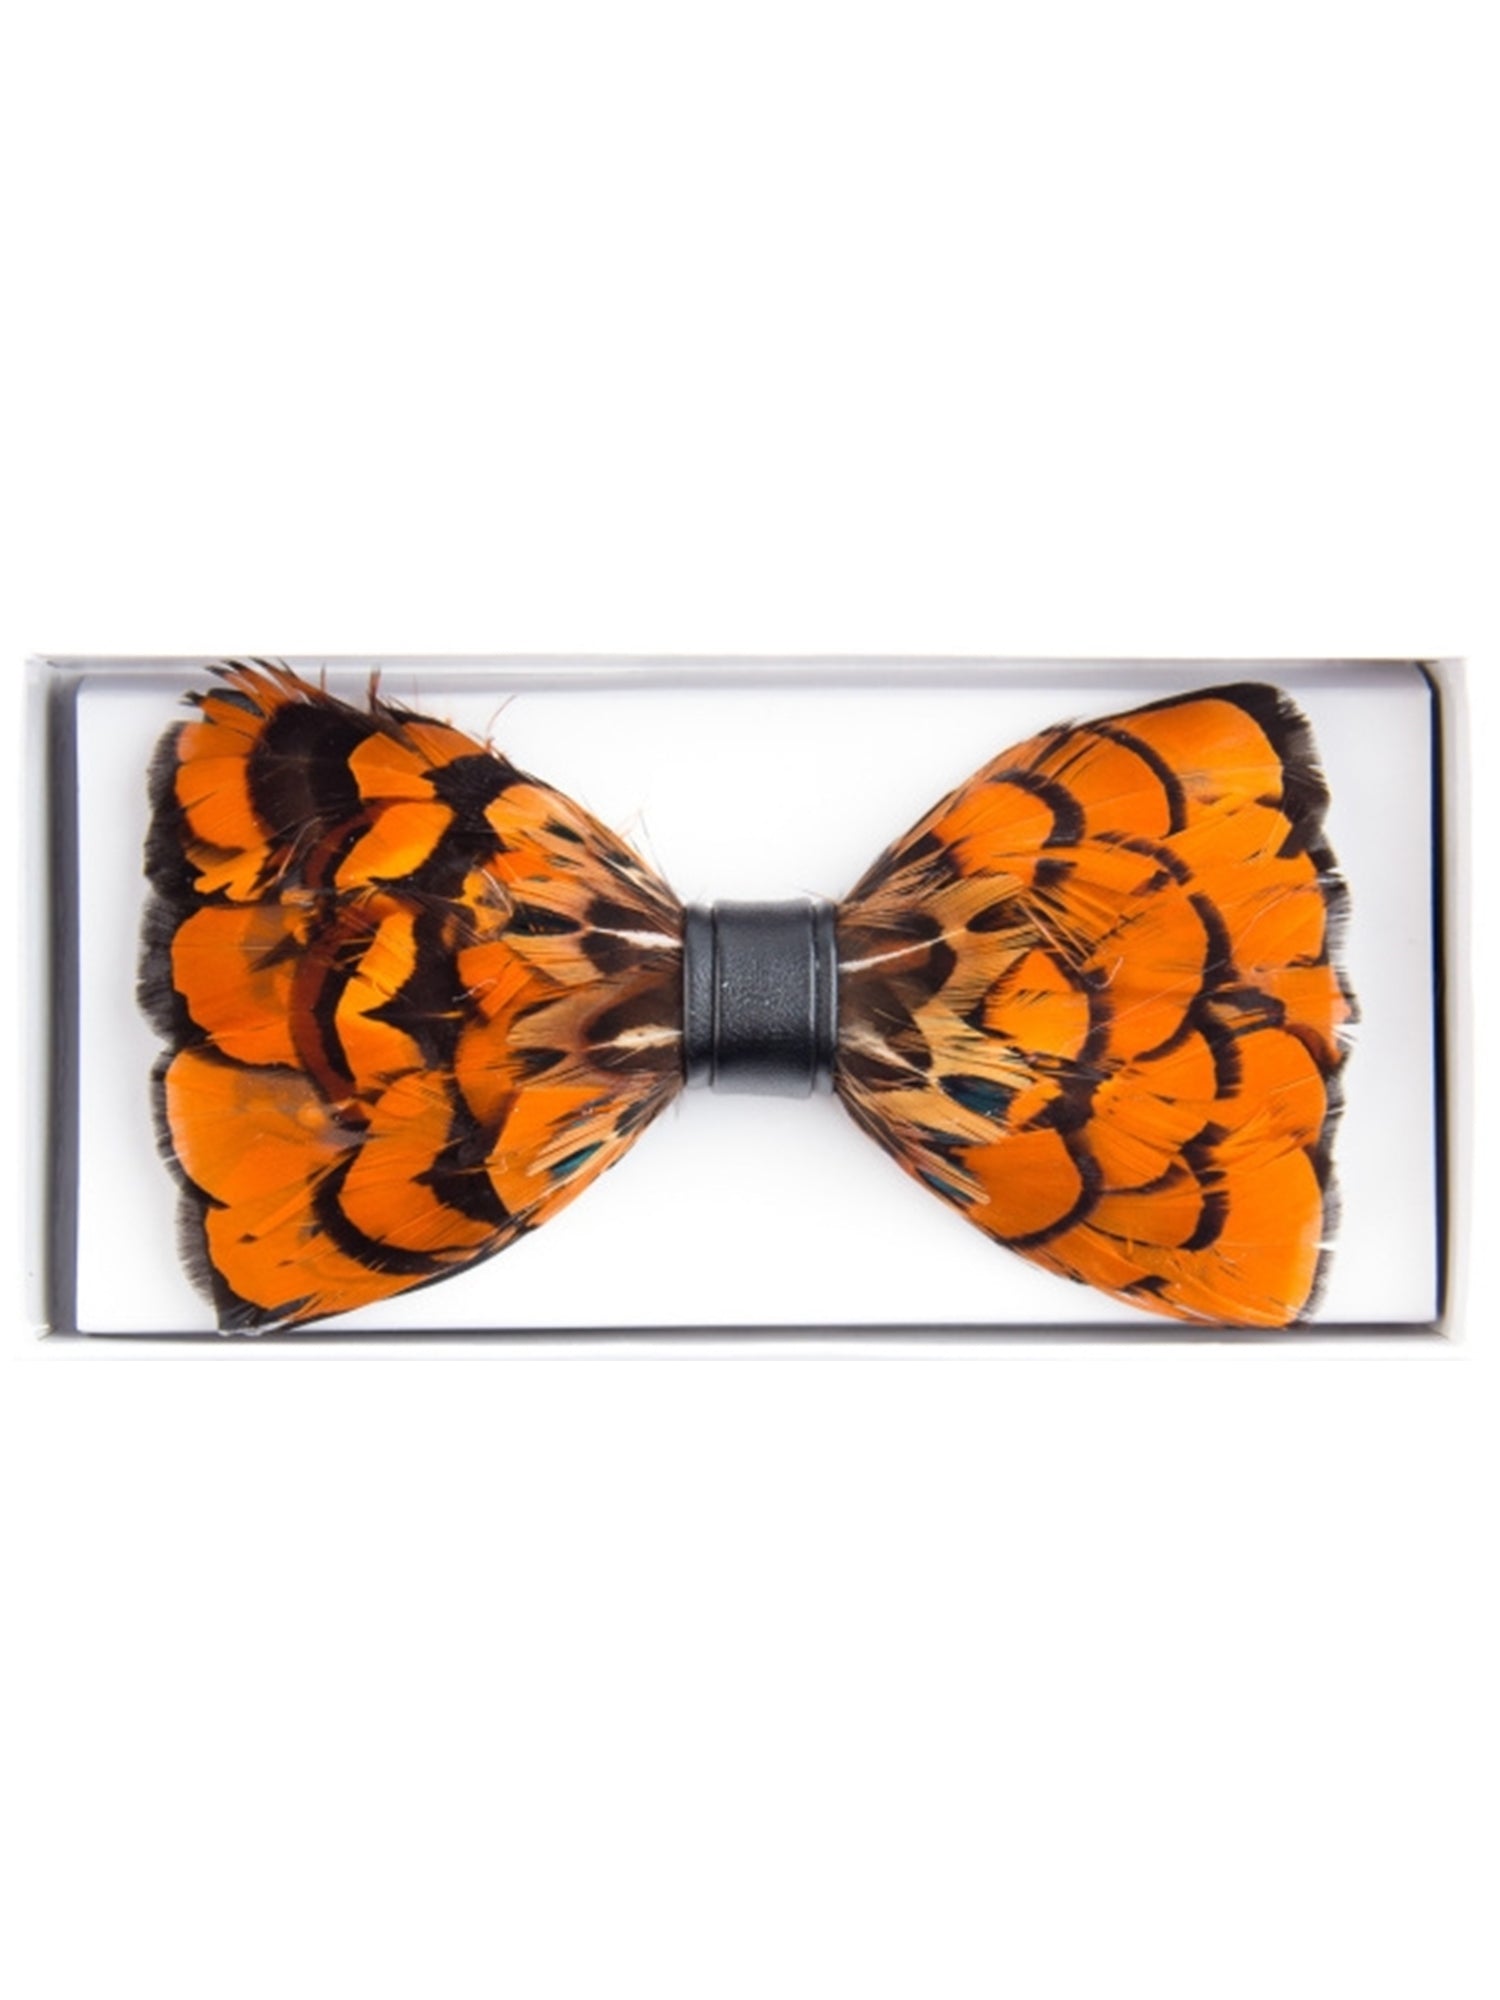 Men's Novelty Feather Banded Bow Tie Bow Tie TheDapperTie Orange And Brown One Size 